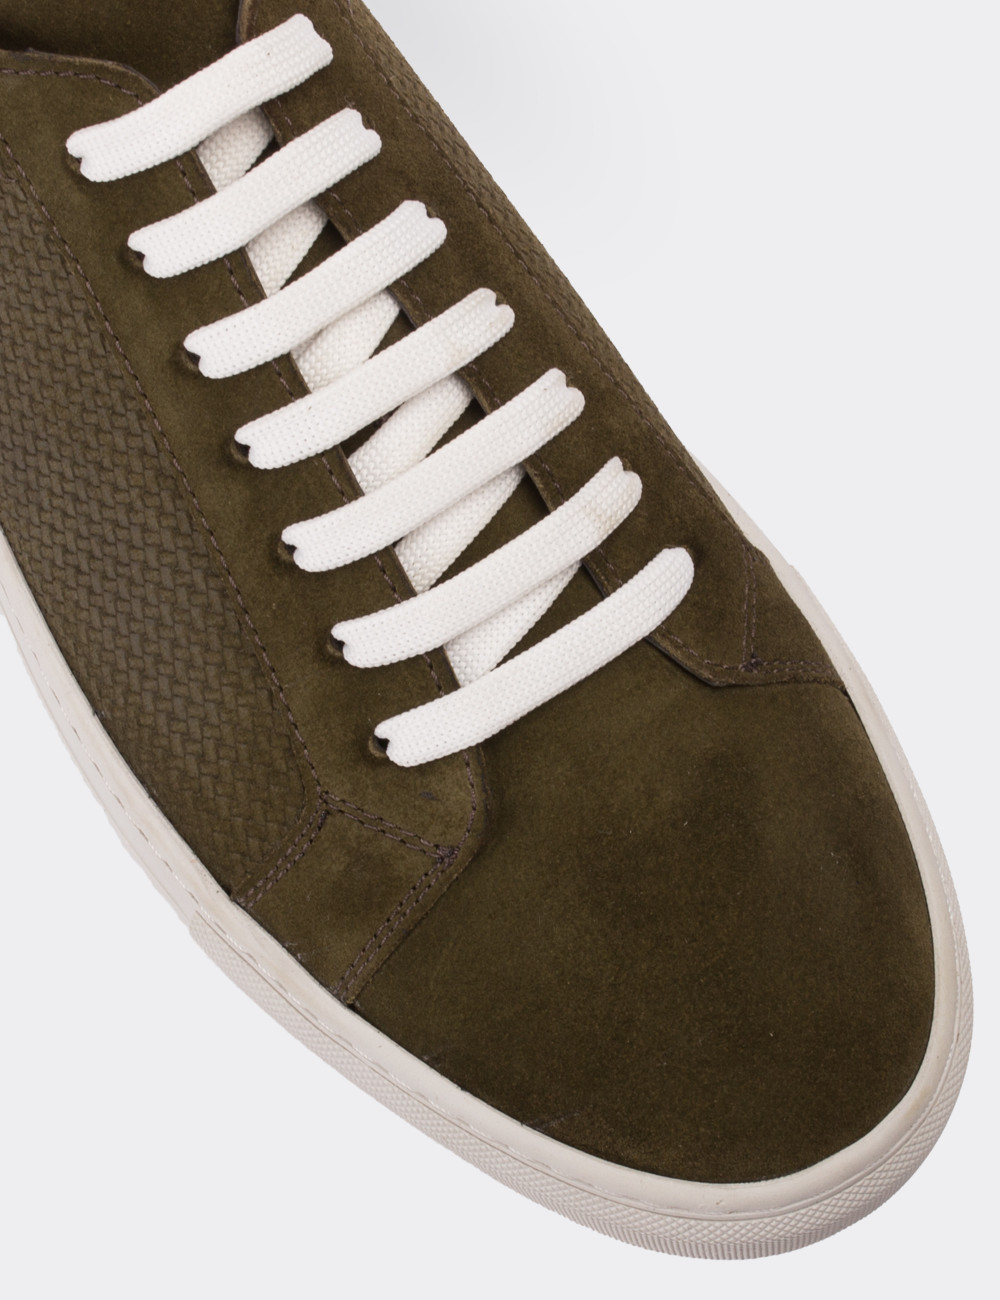 Green Suede Leather Sneakers - 01681MYSLC01